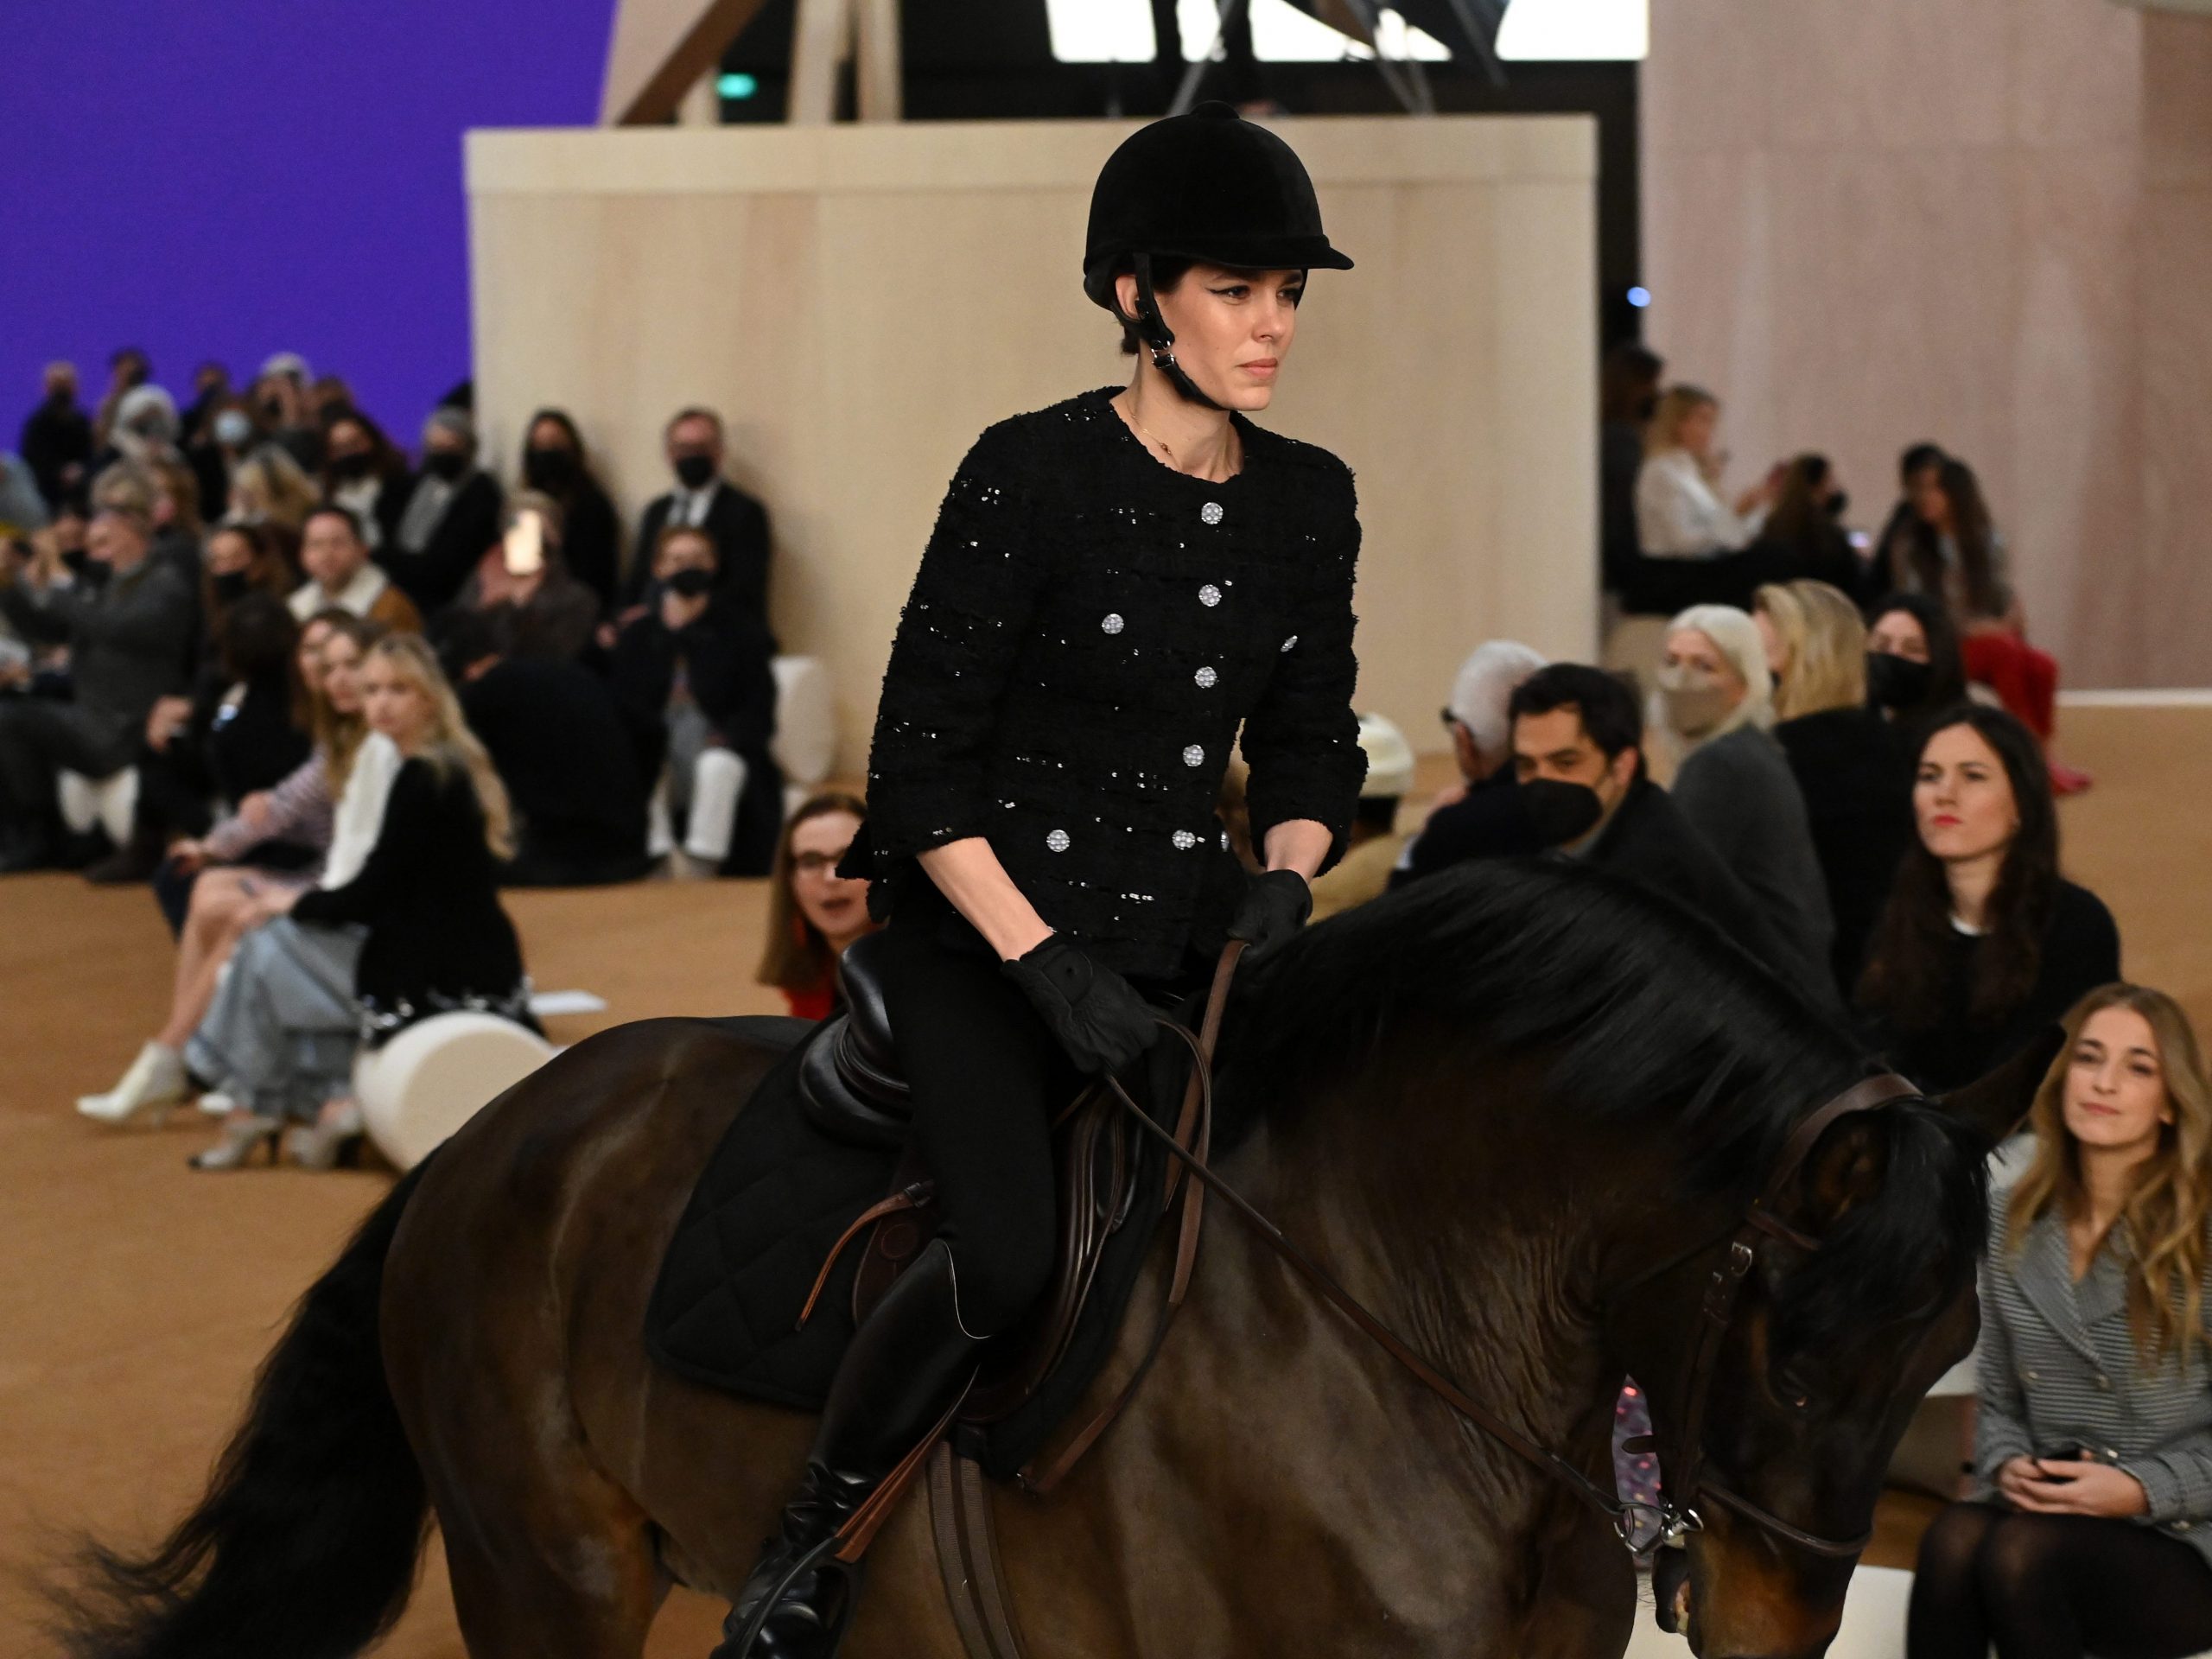 Charlotte Casiraghi rides a horse on the runway during the Chanel Haute Couture Spring/Summer 2022 show as part of Paris Fashion Week at Le Grand Palais Ephemere on January 25, 2022 in Paris, Franc